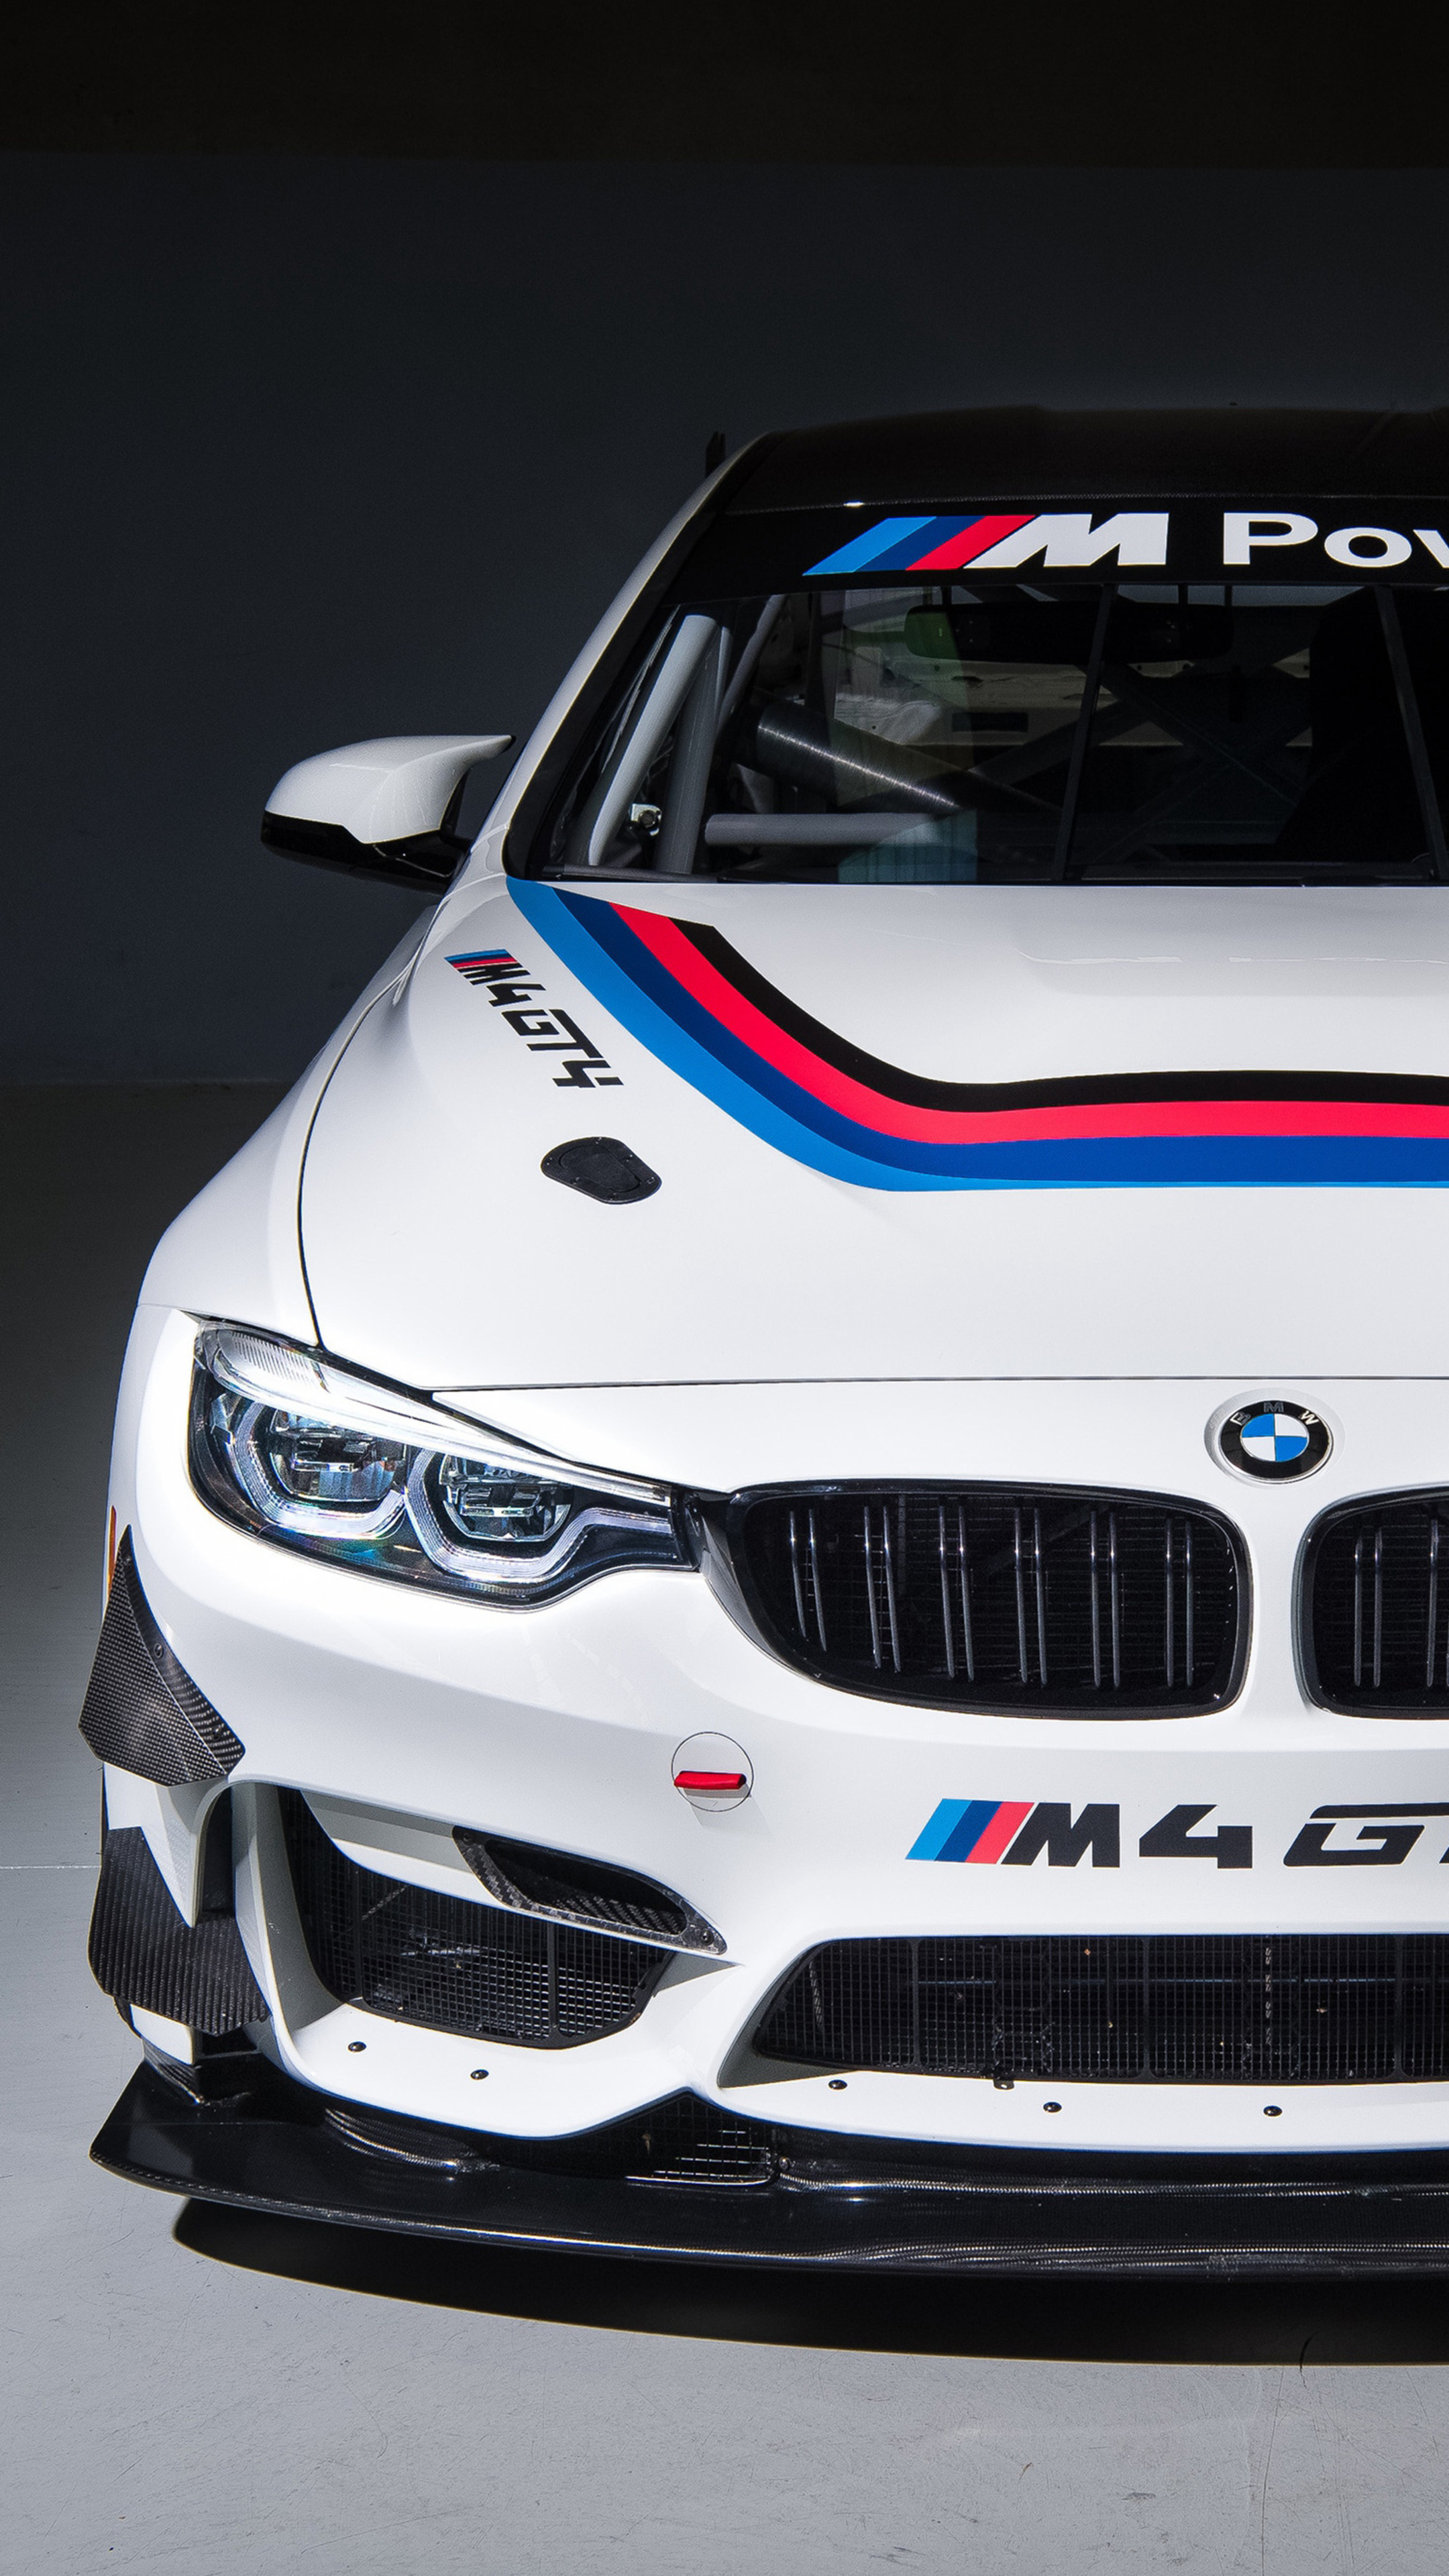 BMW M4, GT4 variant, Sony Xperia wallpapers, Eye-catching design, 2160x3840 4K Handy